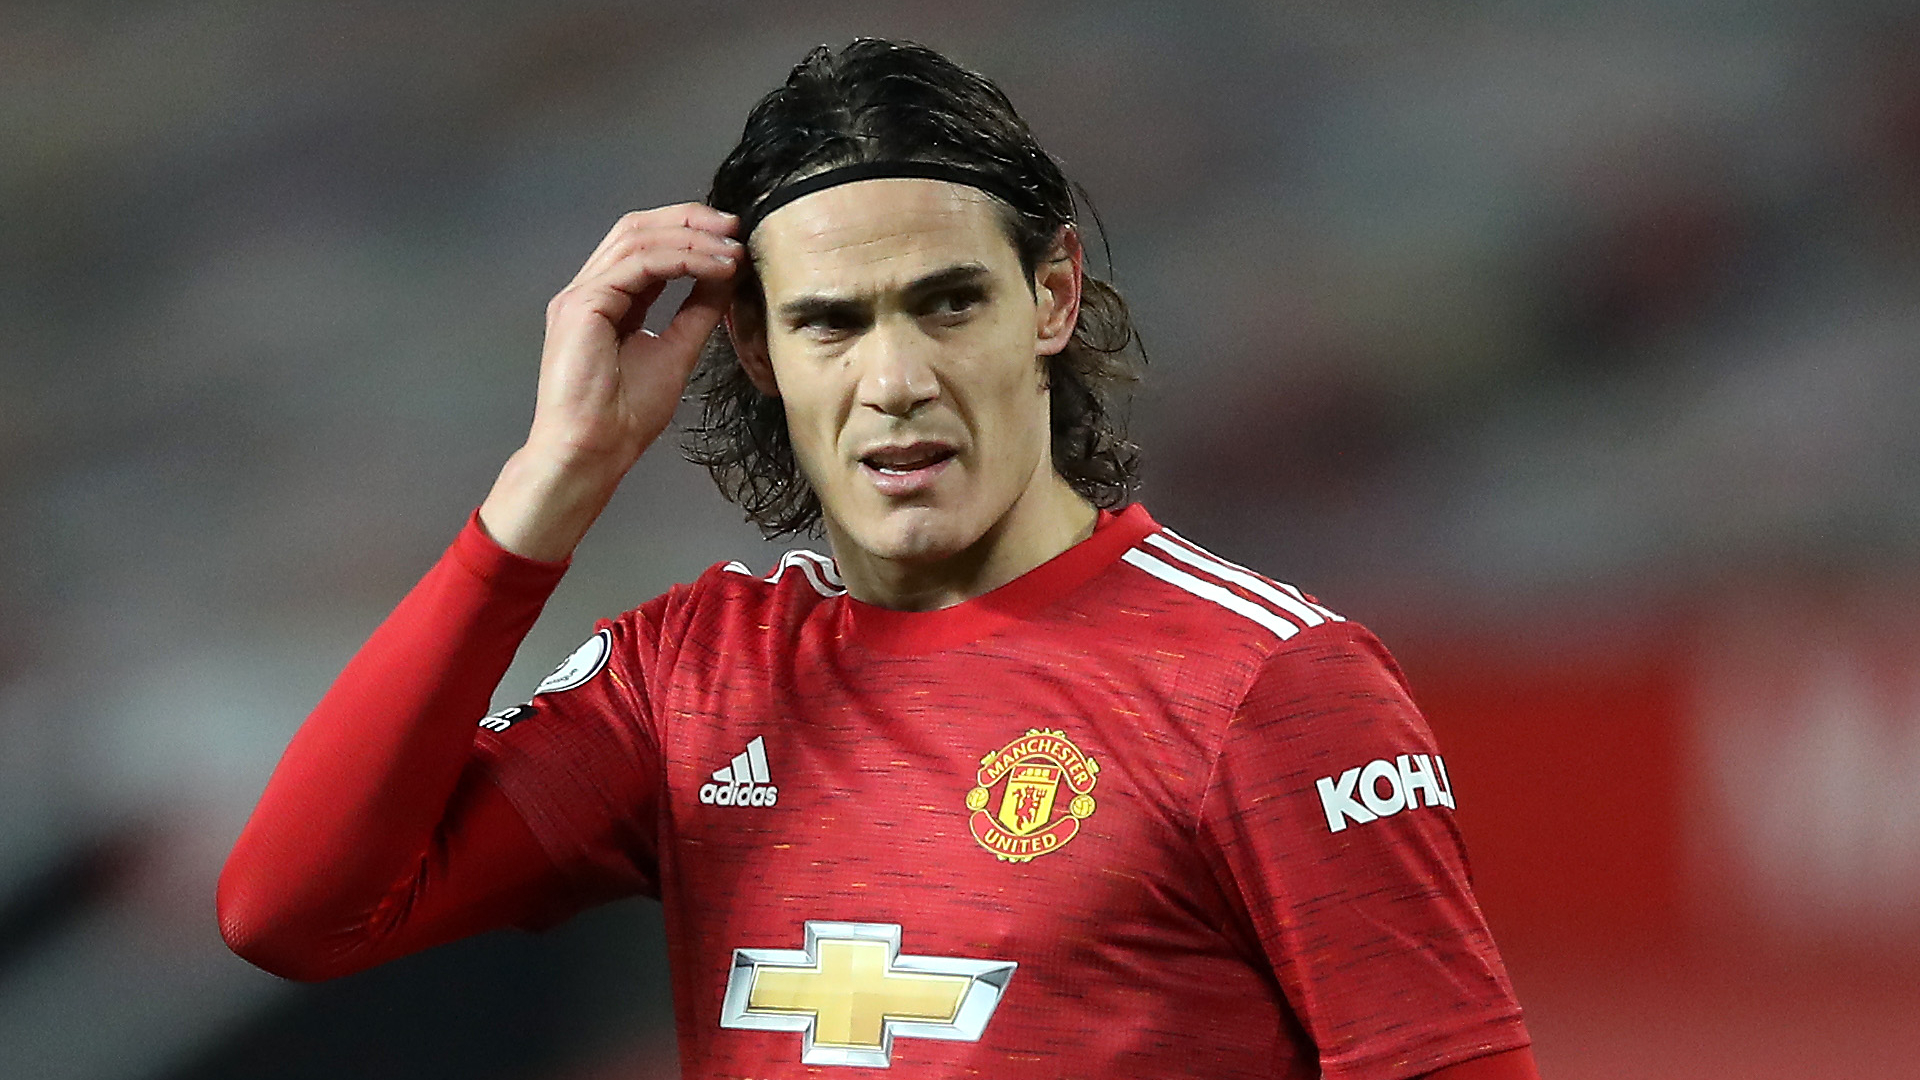 Cavani can be a 'big weapon' as Man Utd seek to deliver psychological blow to Liverpool, says Berbatov